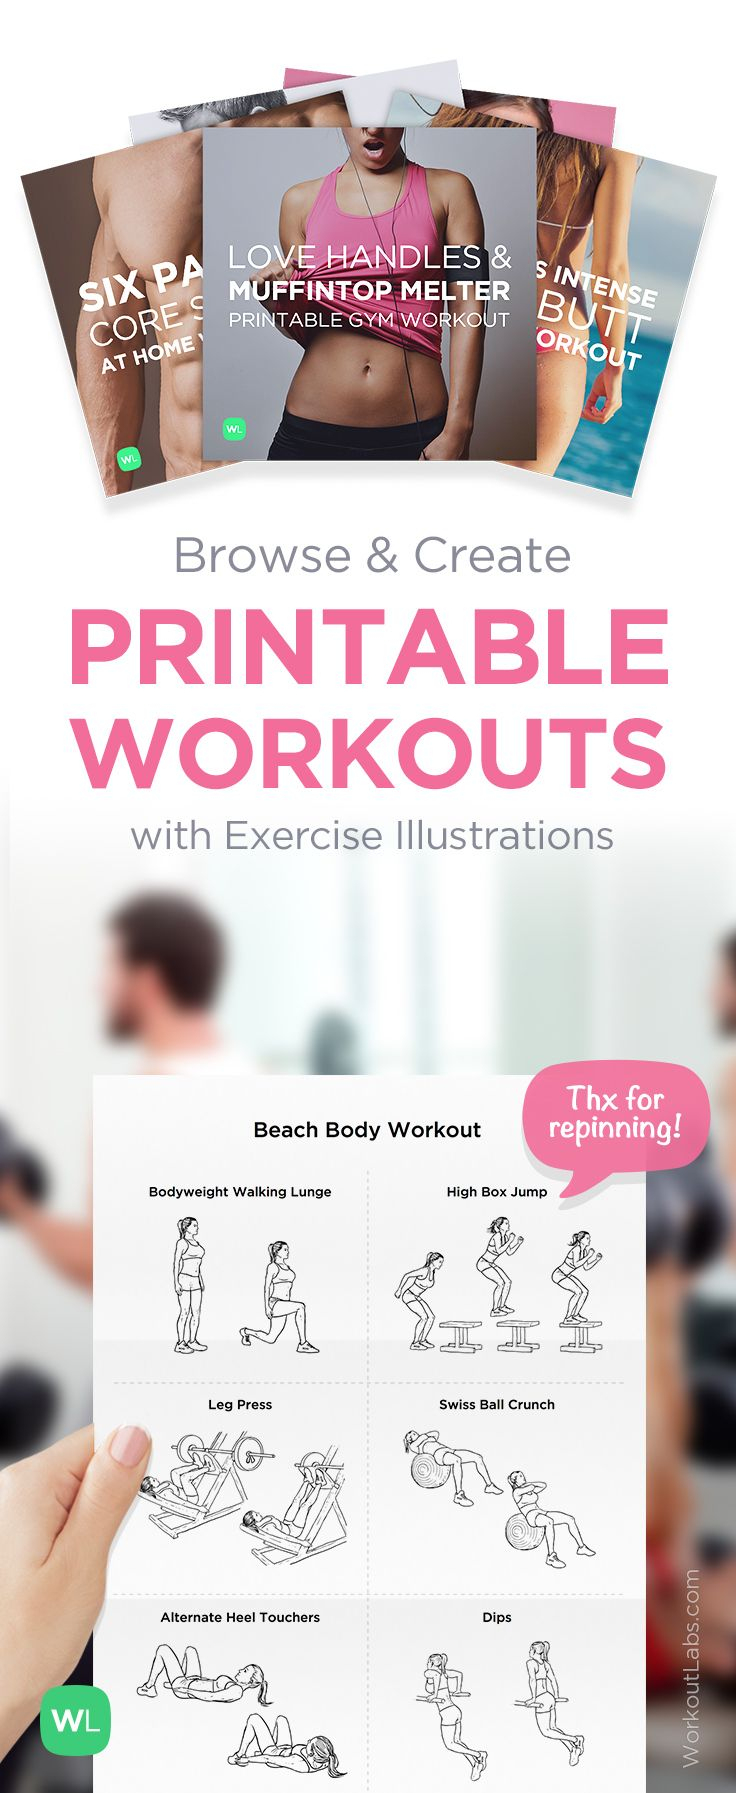 Free Printable Routines, Workout Packs And Exercise Programs - Free Printable Gym Workout Routines